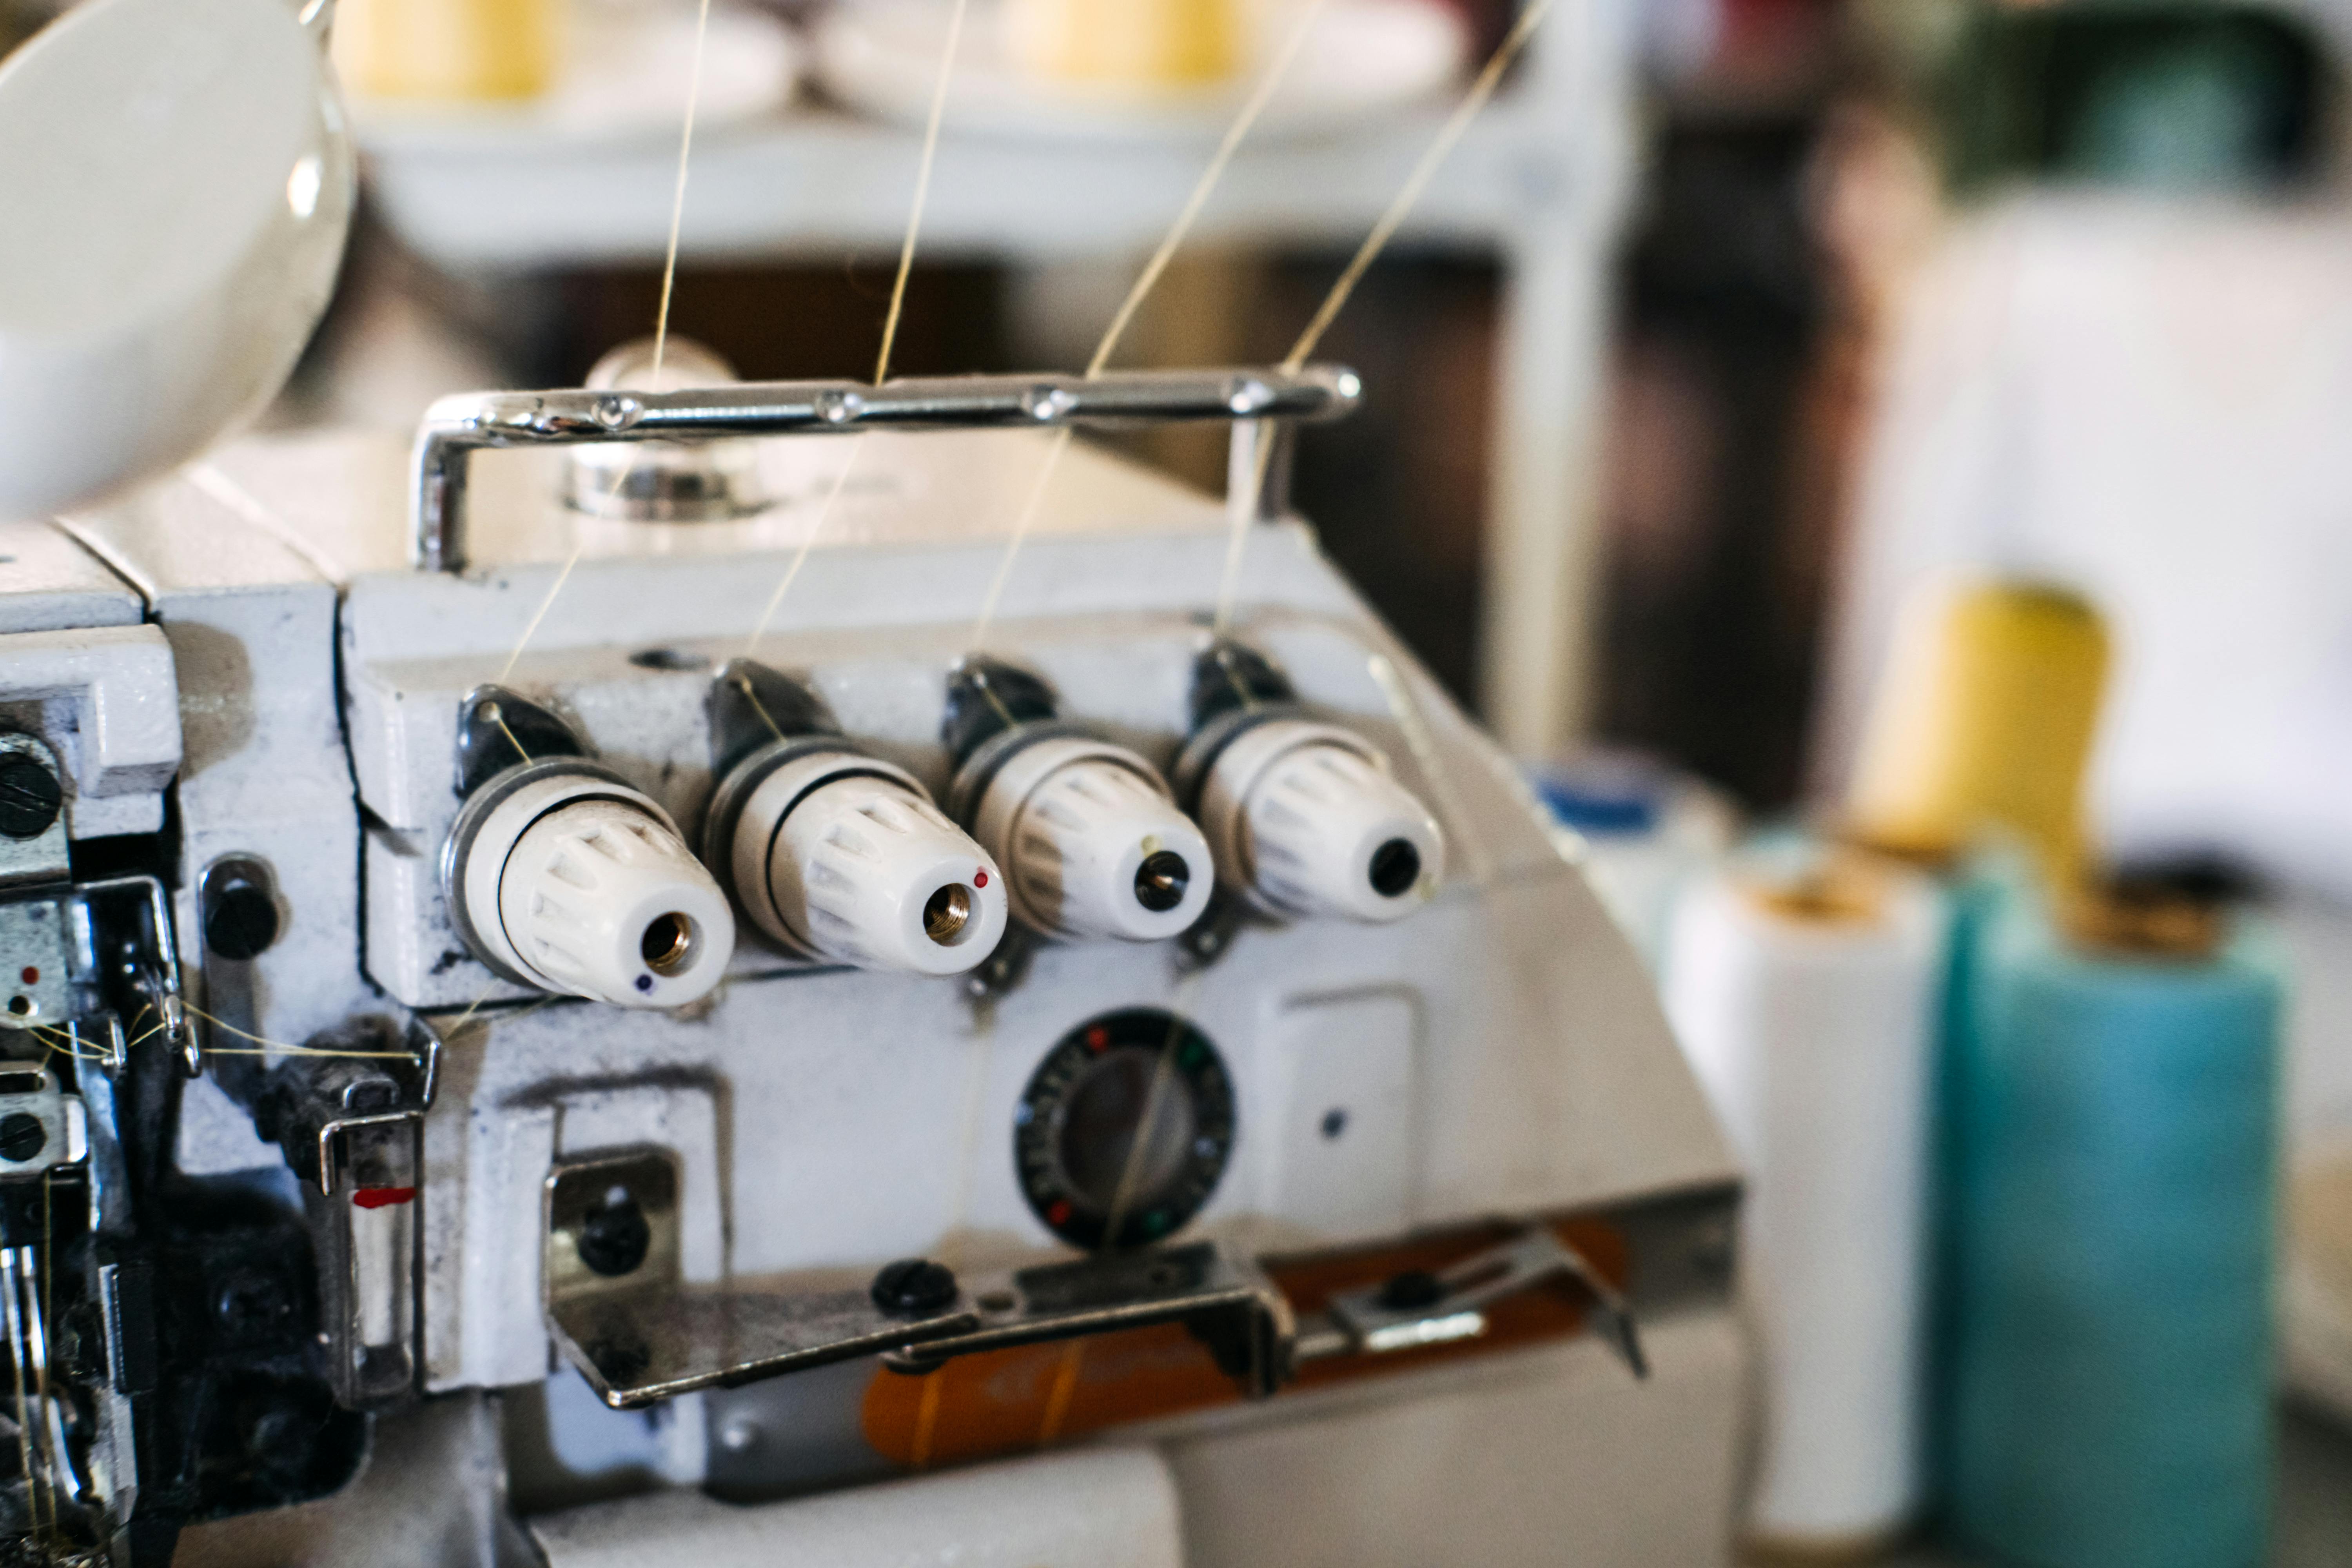  close up photo of a serger machine with threads